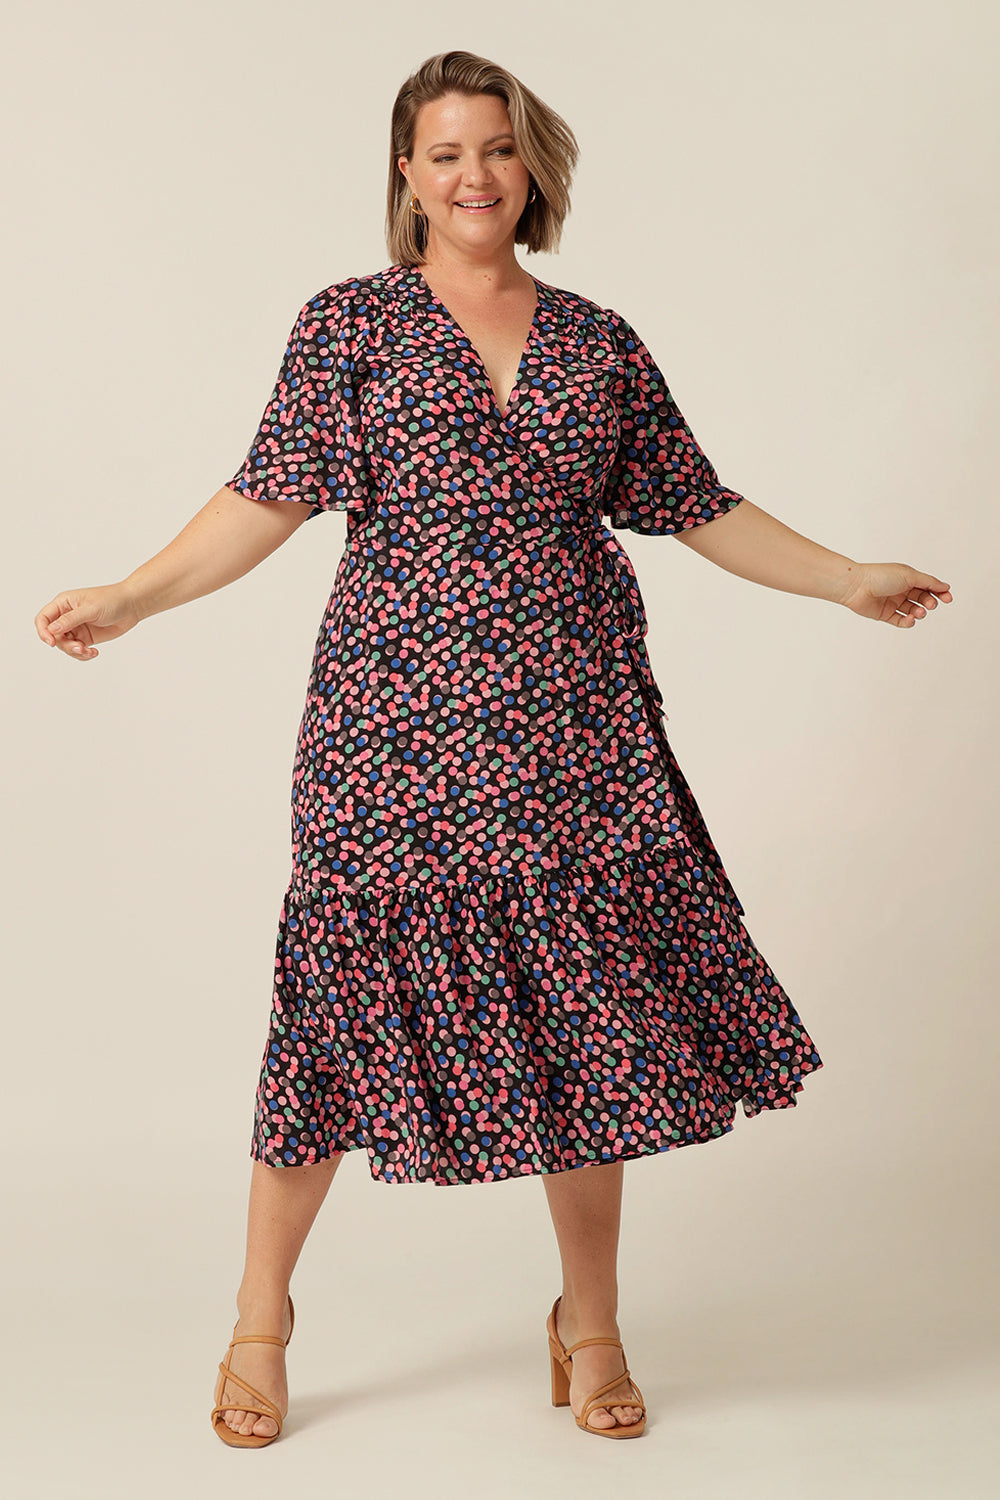 tailored wrap dress with flutter sleeves and  pockets made from breathable fabric. Made in Australia for petite to plus size women.